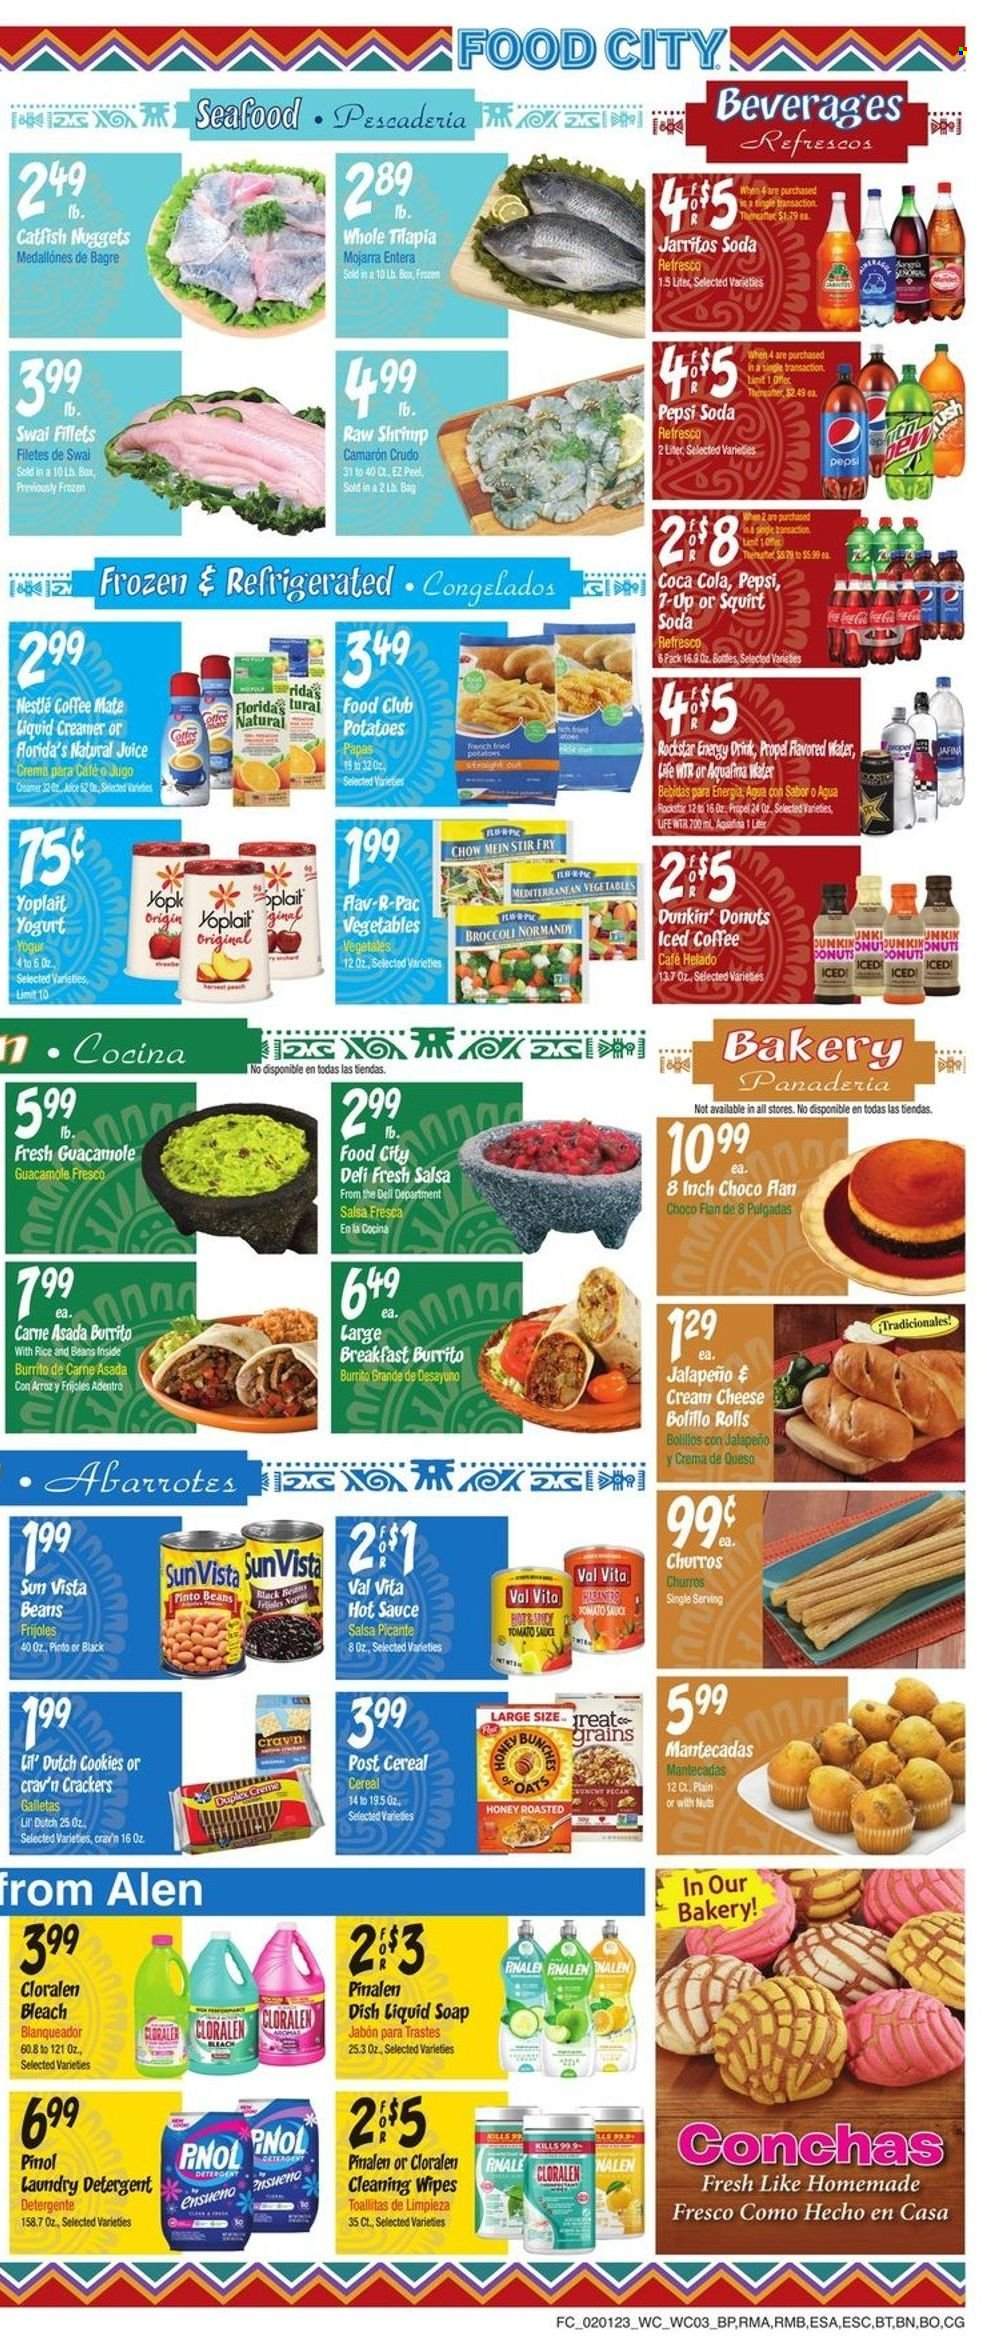 thumbnail - Food City Flyer - 02/01/2023 - 02/07/2023 - Sales products - donut, Dunkin' Donuts, broccoli, potatoes, jalapeño, catfish, tilapia, seafood, shrimps, catfish nuggets, swai fillet, sauce, burrito, guacamole, cheese, Yoplait, Coffee-Mate, creamer, cookies, Nestlé, crackers, Florida's Natural, tomato sauce, pinto beans, cereals, churros, hot sauce, salsa, honey, Coca-Cola, Pepsi, juice, energy drink, 7UP, Rockstar, Aquafina, flavored water, soda, iced coffee. Page 3.